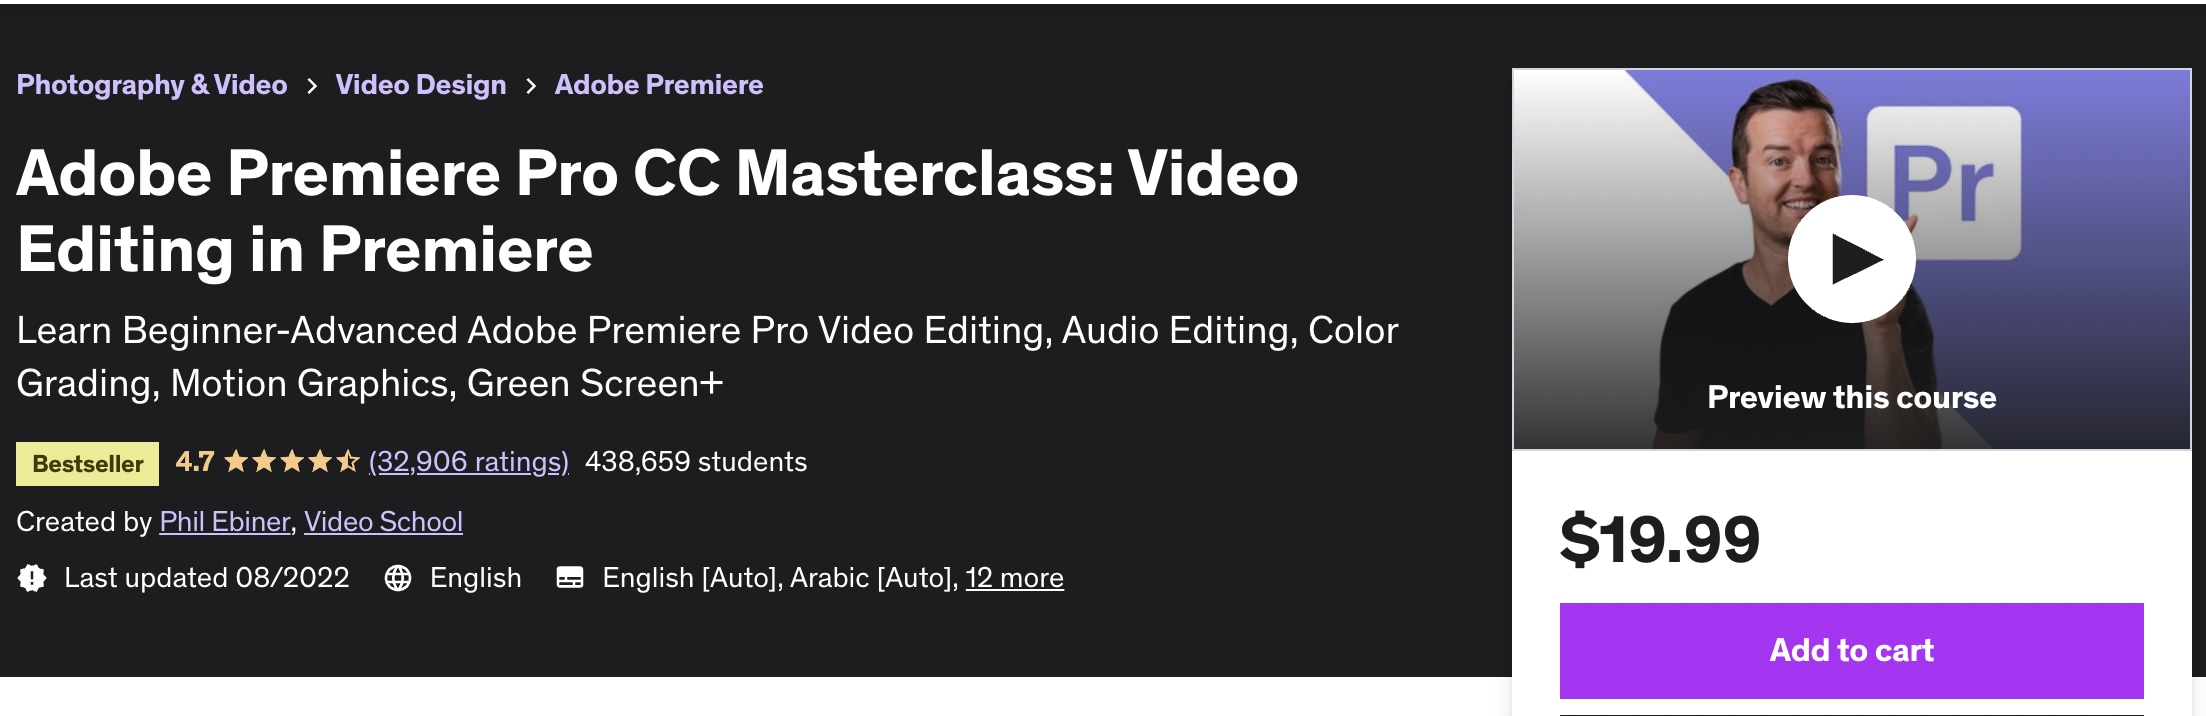 video editing in premiere